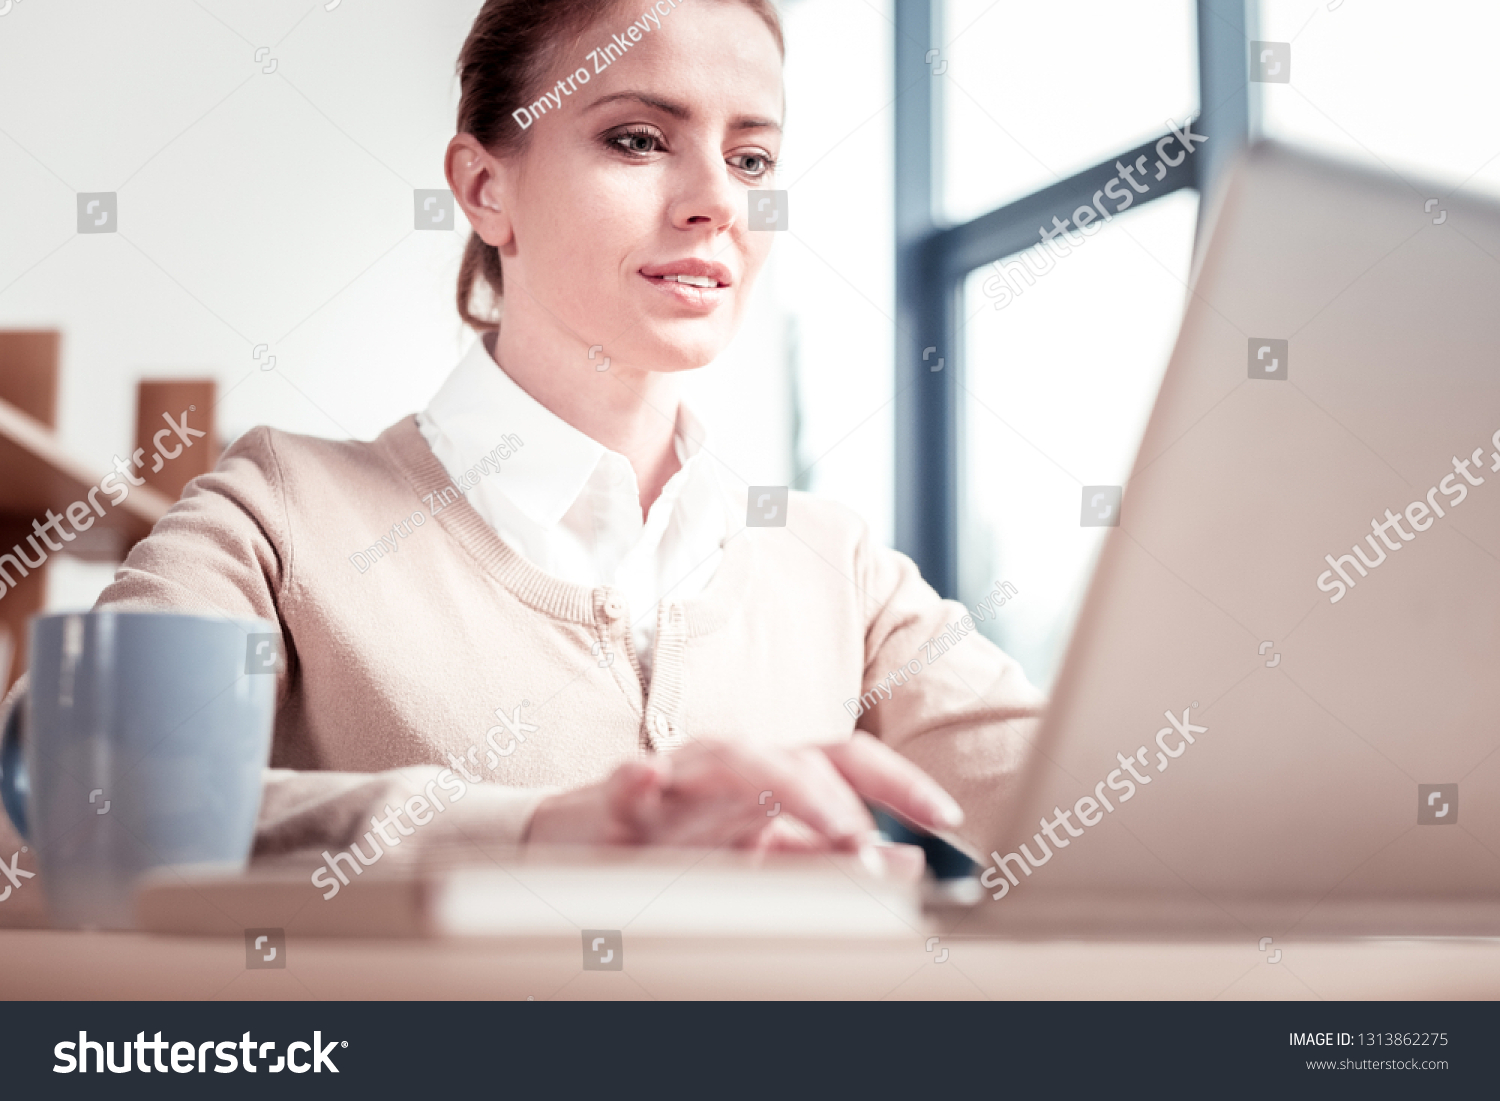 Communication technologies. Communication technologies expert feeling pressed for time using beige laptop while working #1313862275